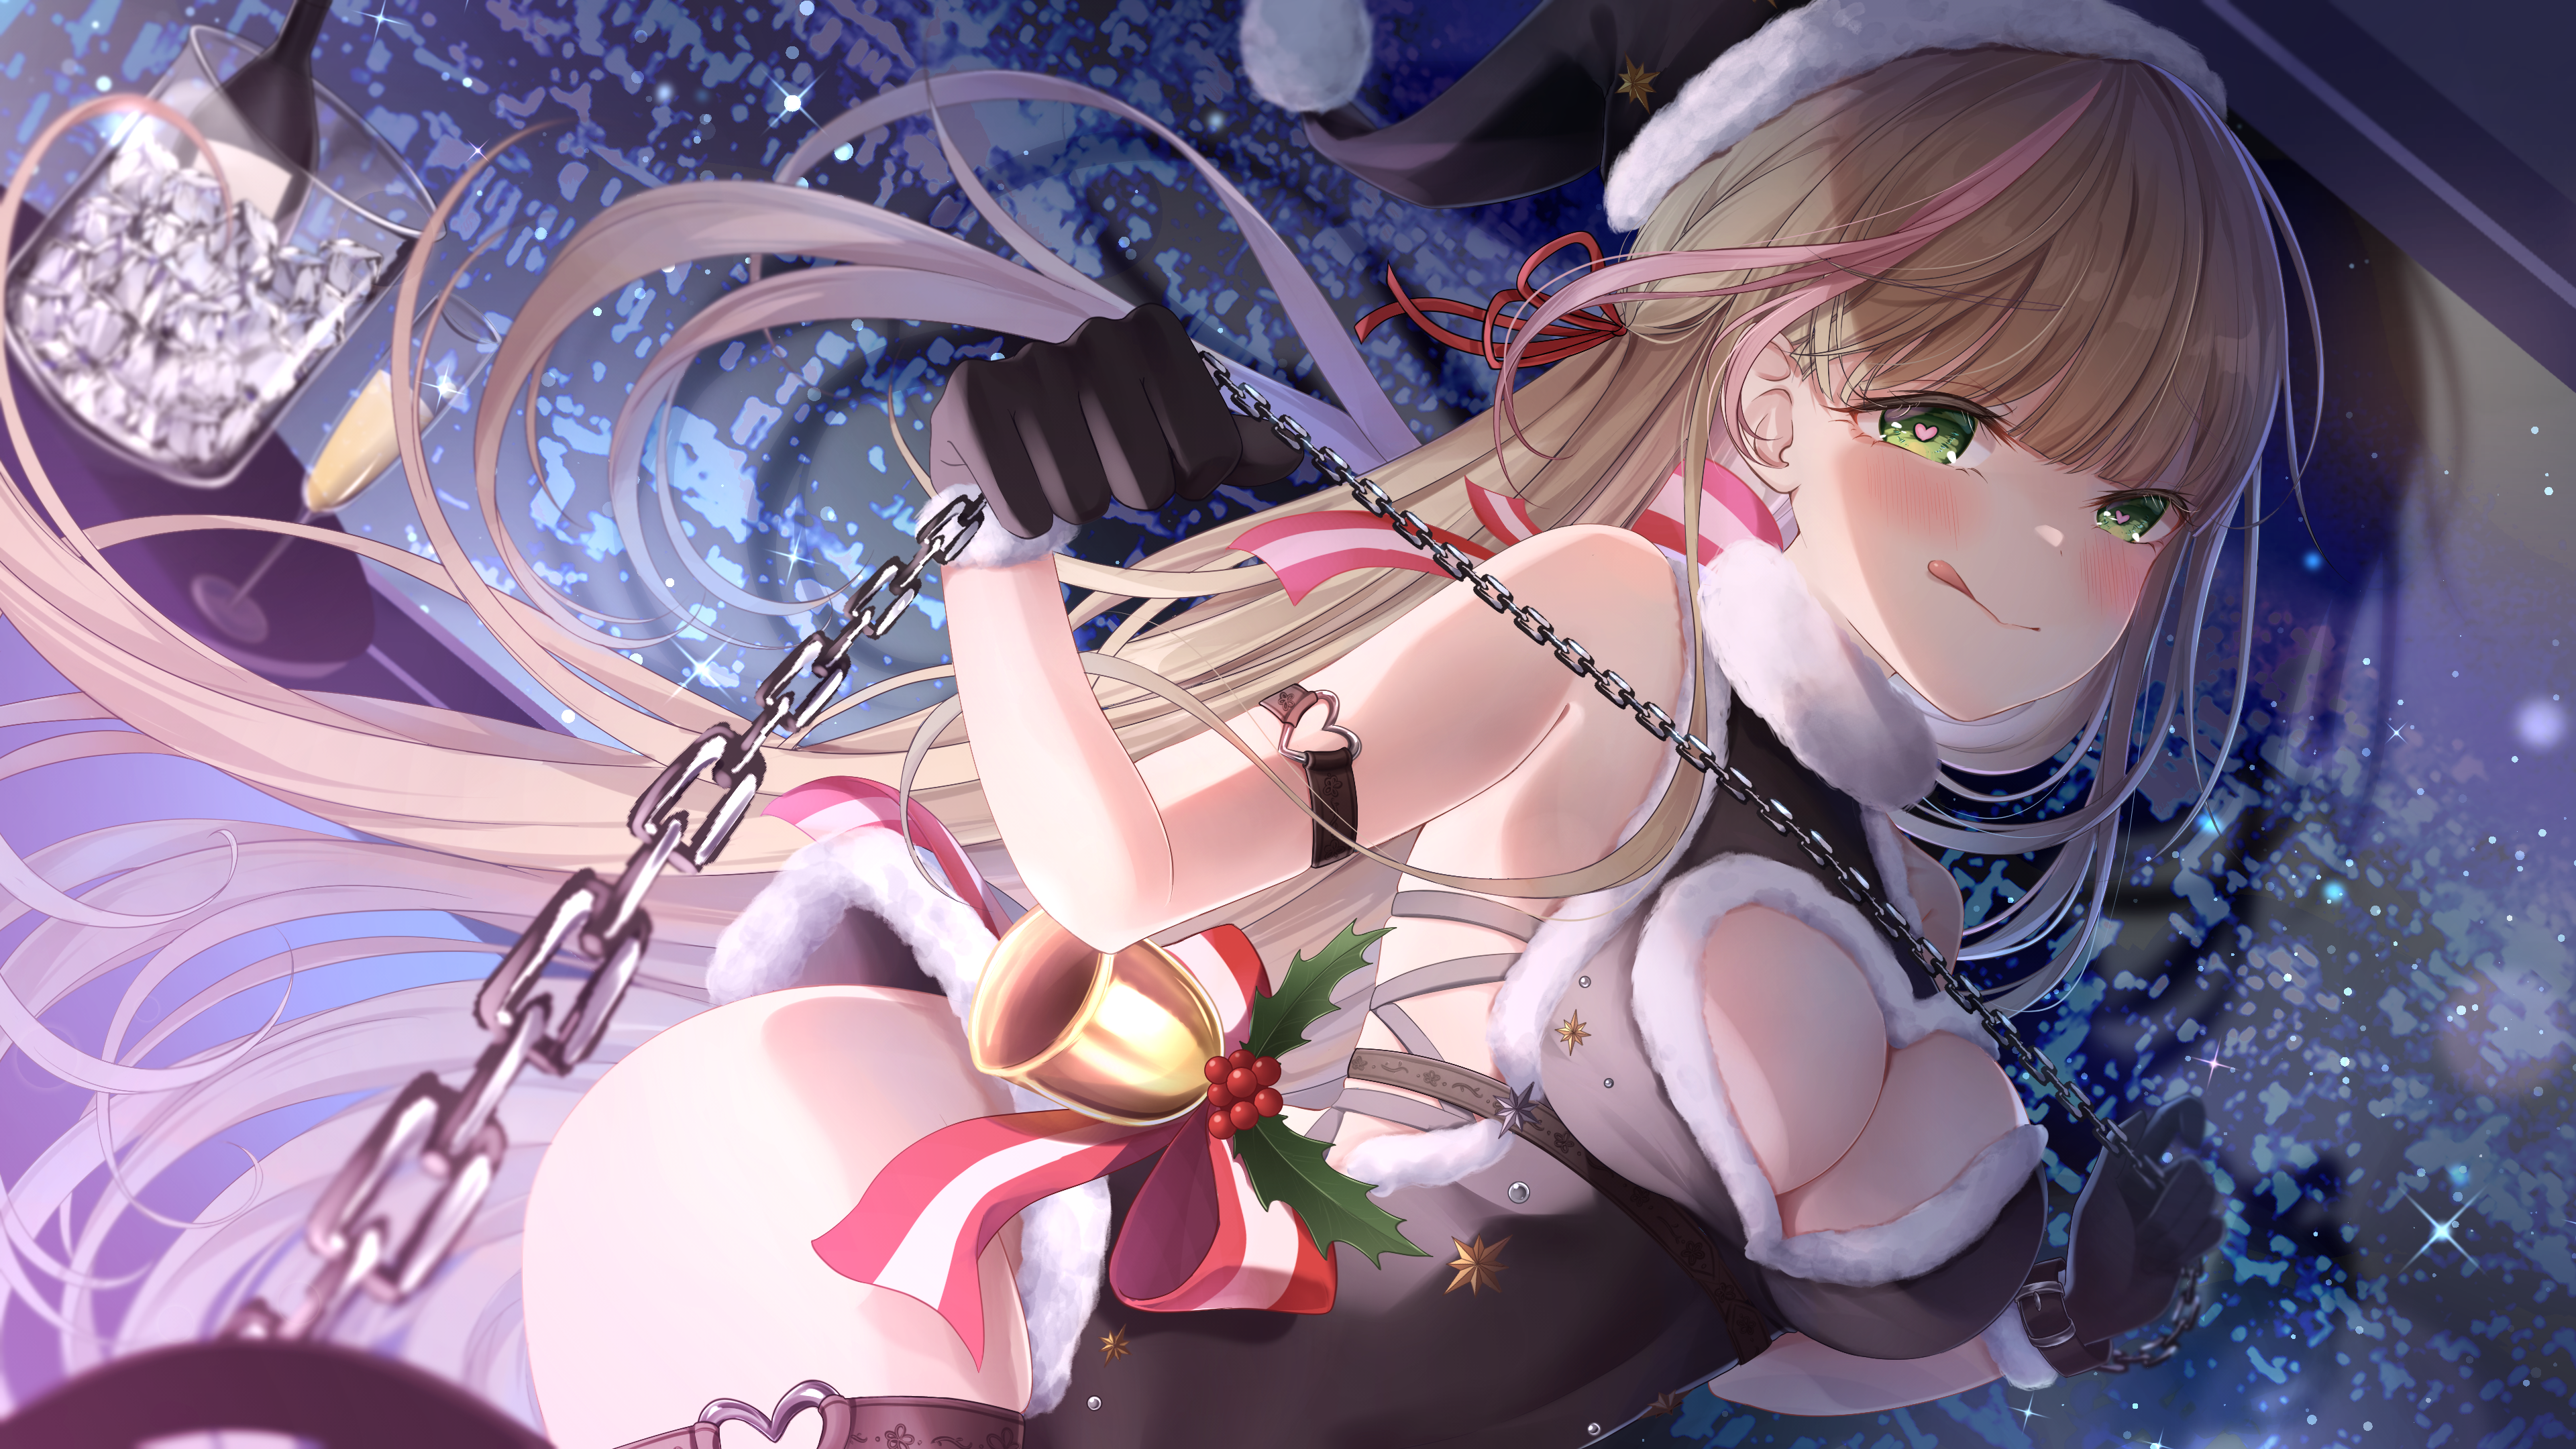 Anime 3840x2160 anime anime girls Virtual Youtuber green eyes heart eyes confidential_y Amano mano (Vtuber) tongue out blushing tongues looking at viewer cleavage big boobs Christmas bare shoulders Santa hats ice cubes champagne table sparkles black gloves gloves cityscape city cleavage cutout thighs bangs bells bow tie glass bottle Christmas clothes night chains